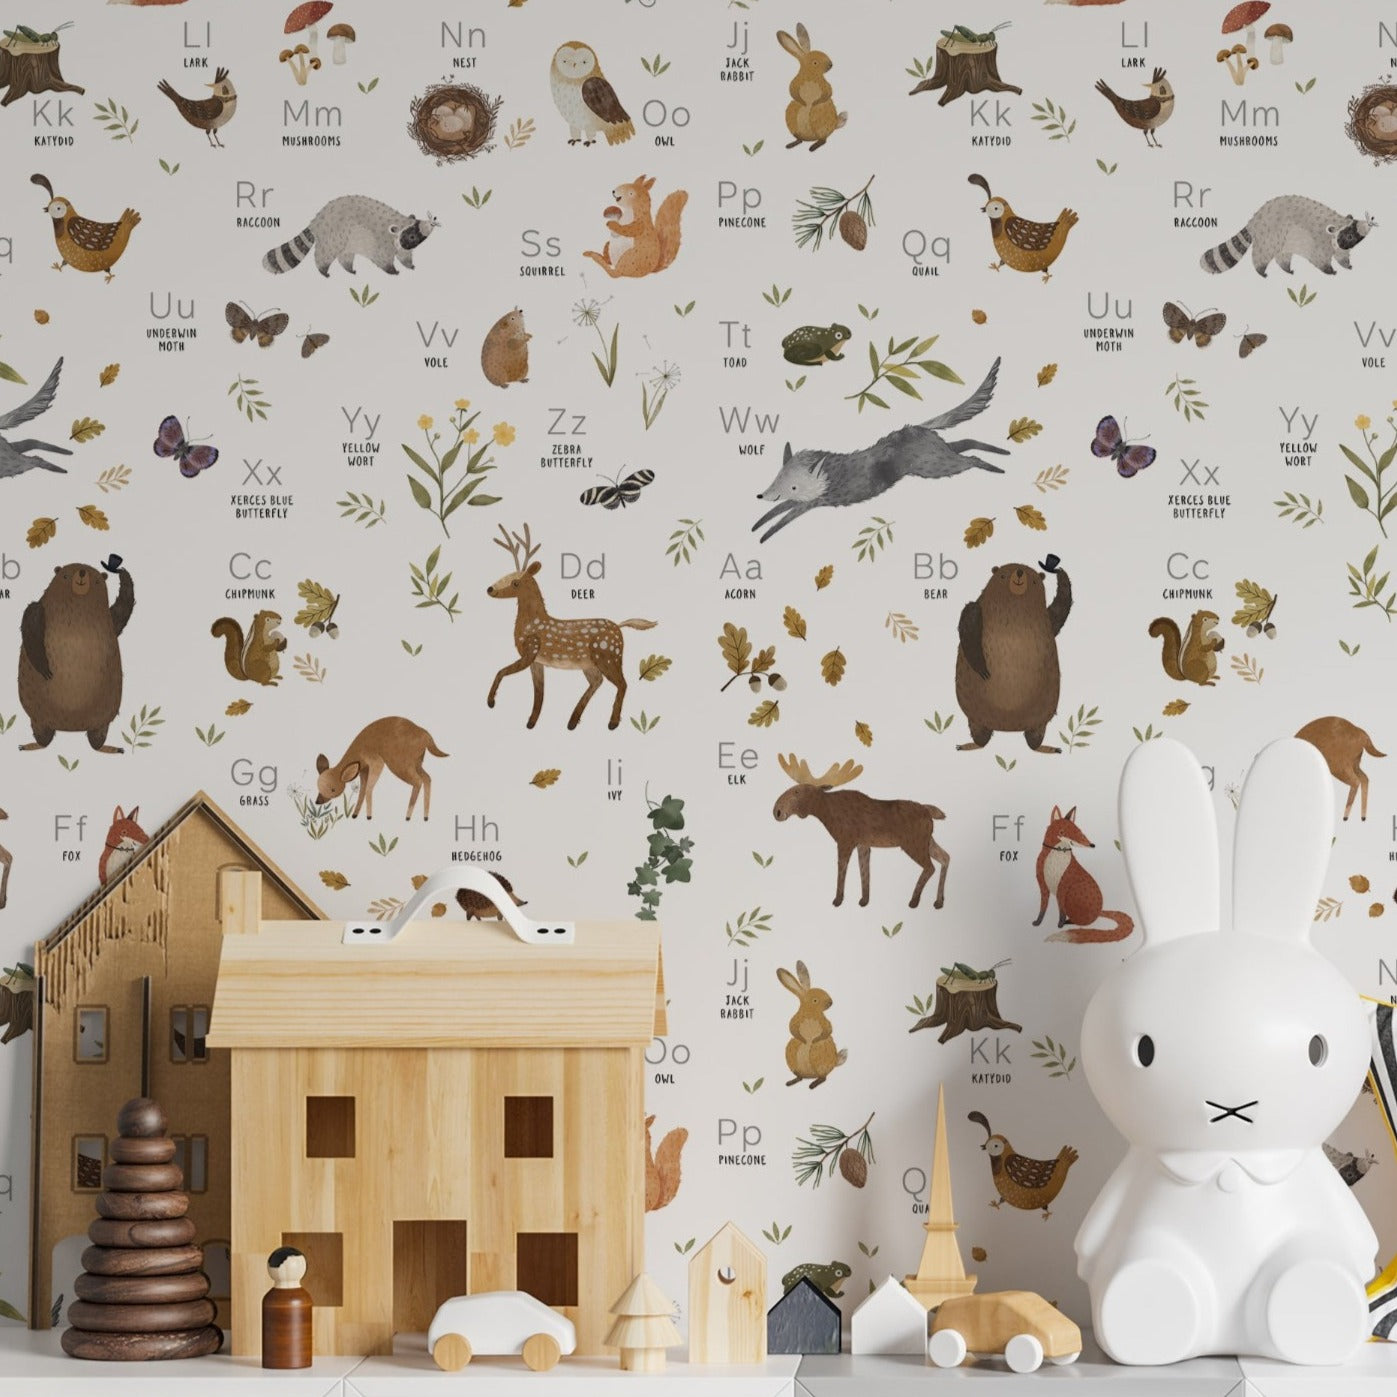 A playful children's room featuring the 'Forest Alphabet Animal Wallpaper' on the walls. The wallpaper is educational and fun, with a variety of forest animals paired with the alphabet. It forms a delightful backdrop for the white shelving unit filled with toys, creating an enchanting and stimulating environment for children.